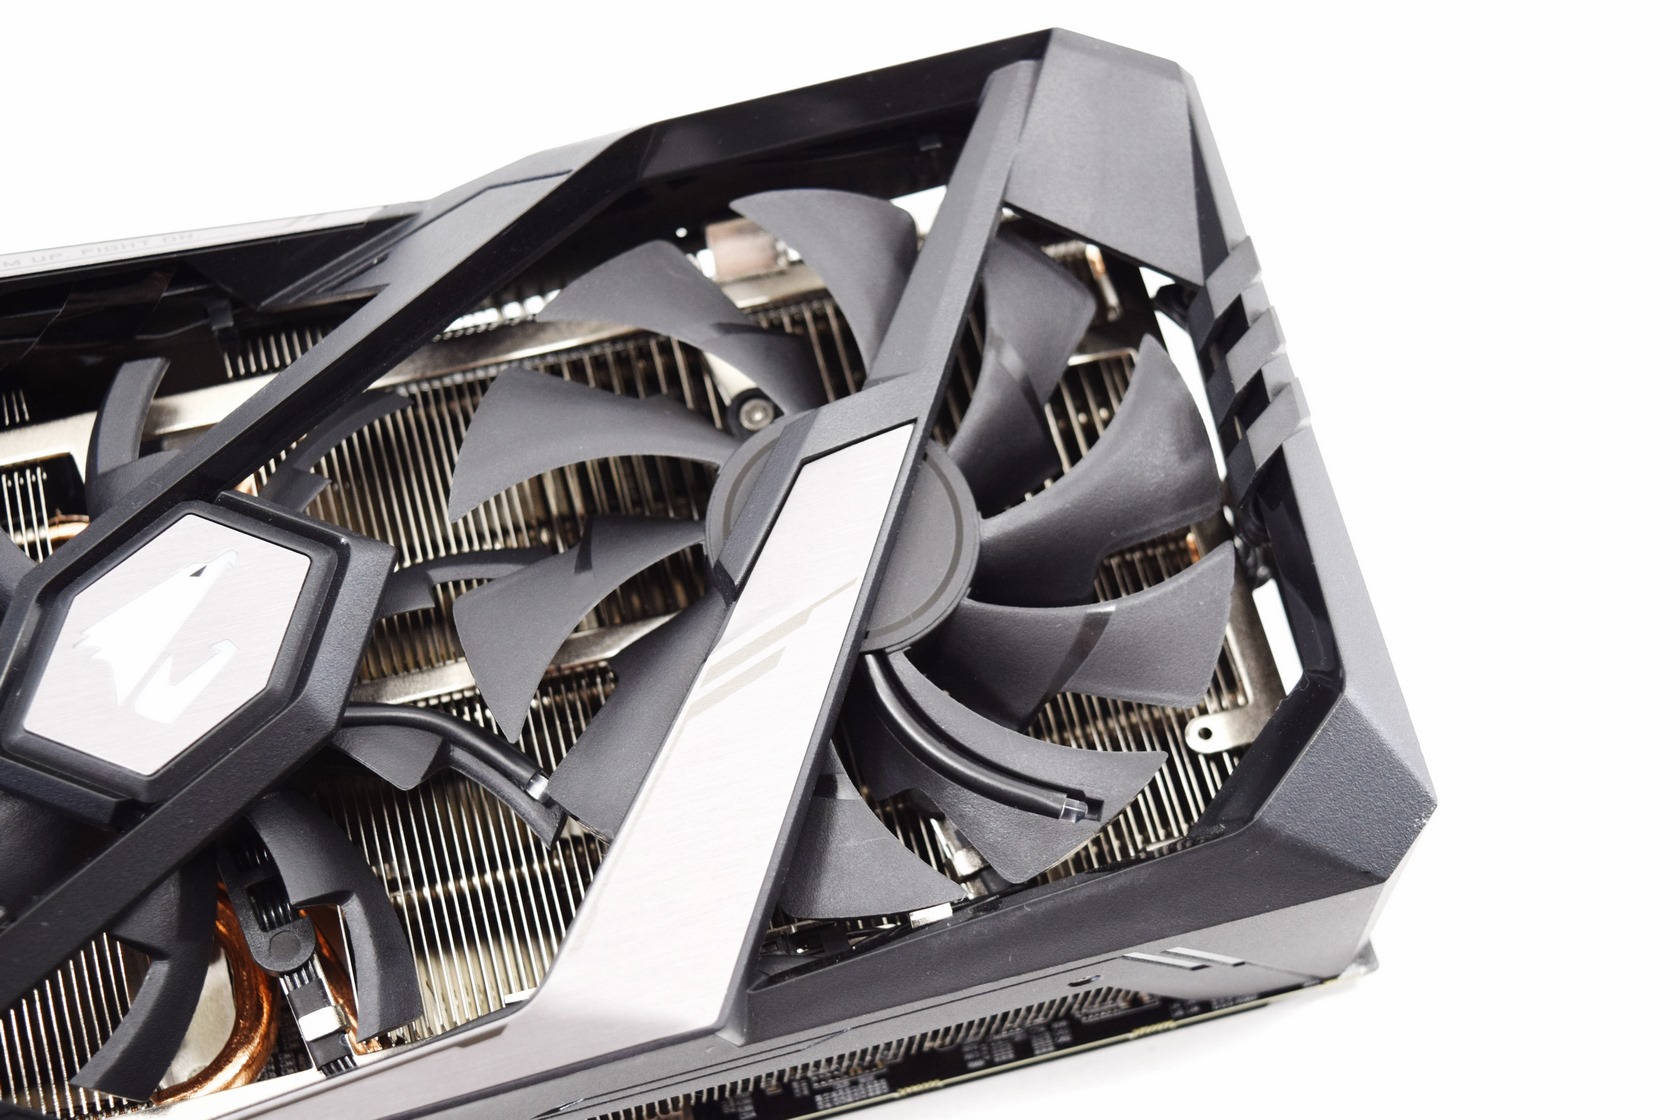 GIGABYTE AORUS GeForce RTX 2070 Super Graphics Card Review